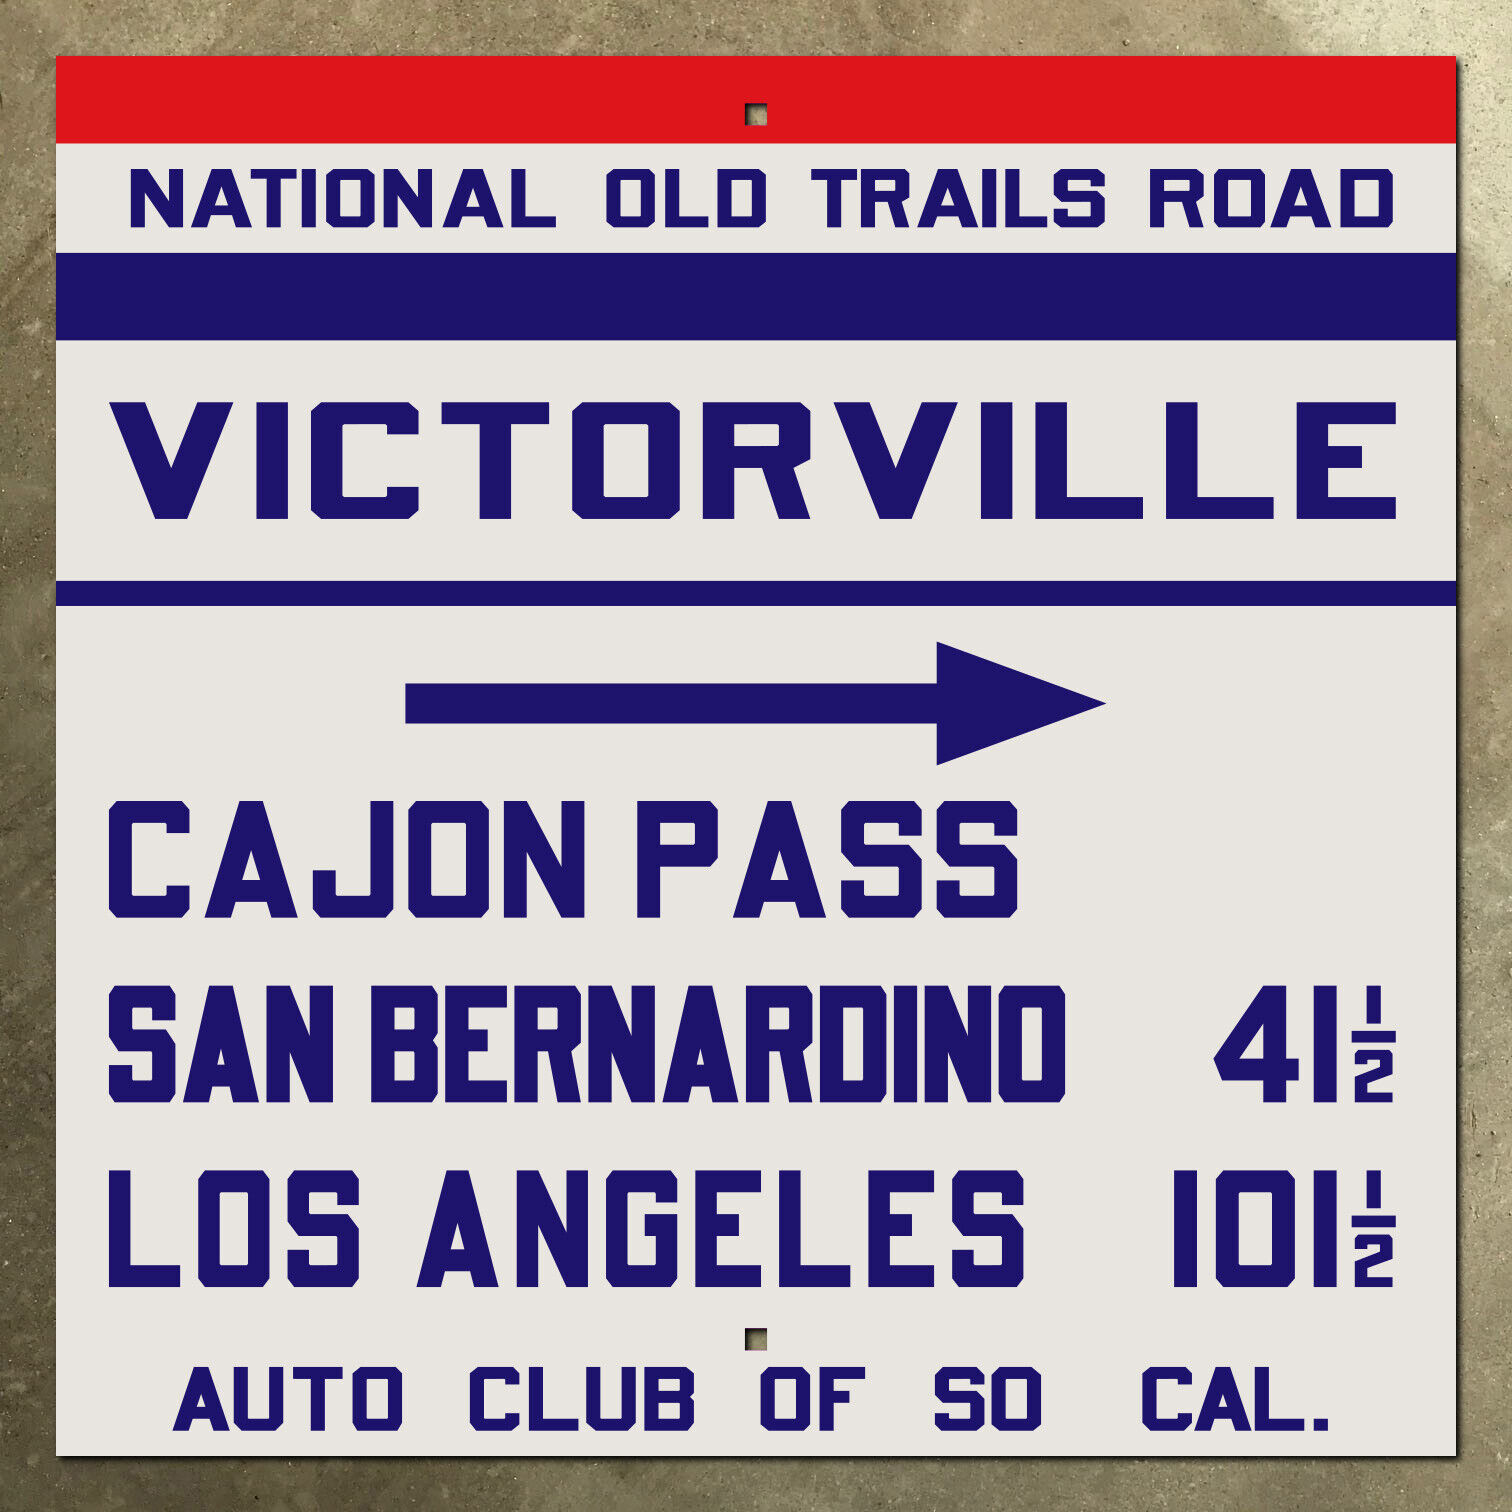 ACSC National Old Trails Road Victorville California highway sign route 66 16x16